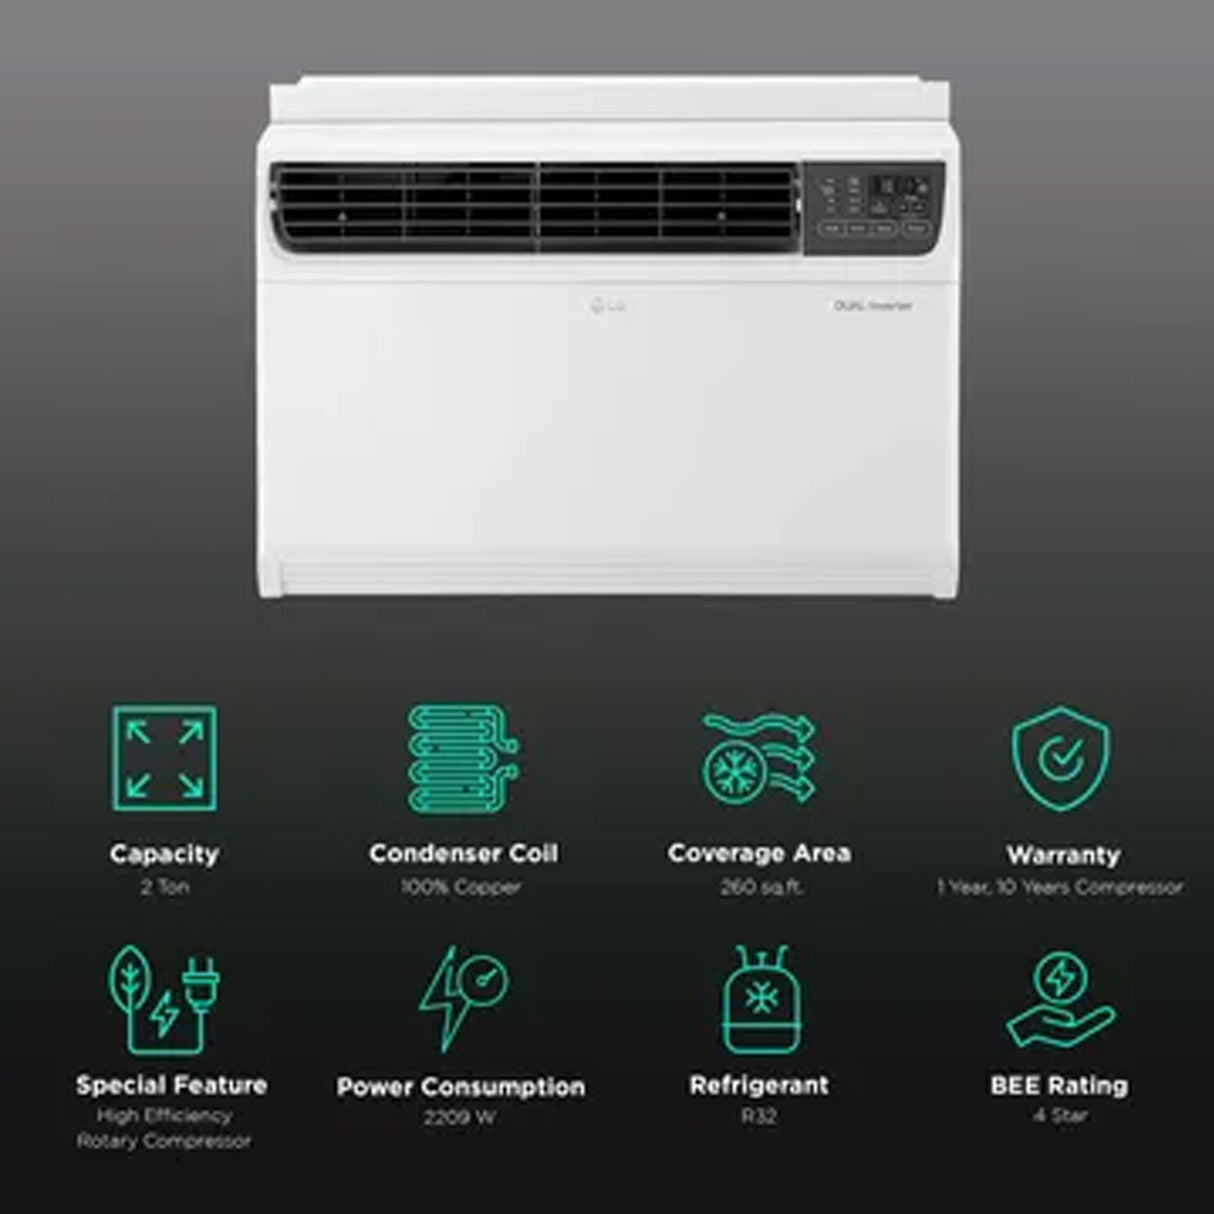 Best Air Conditioner: LG 2 Ton 4 Star Window AC - Advanced Cooling Technology